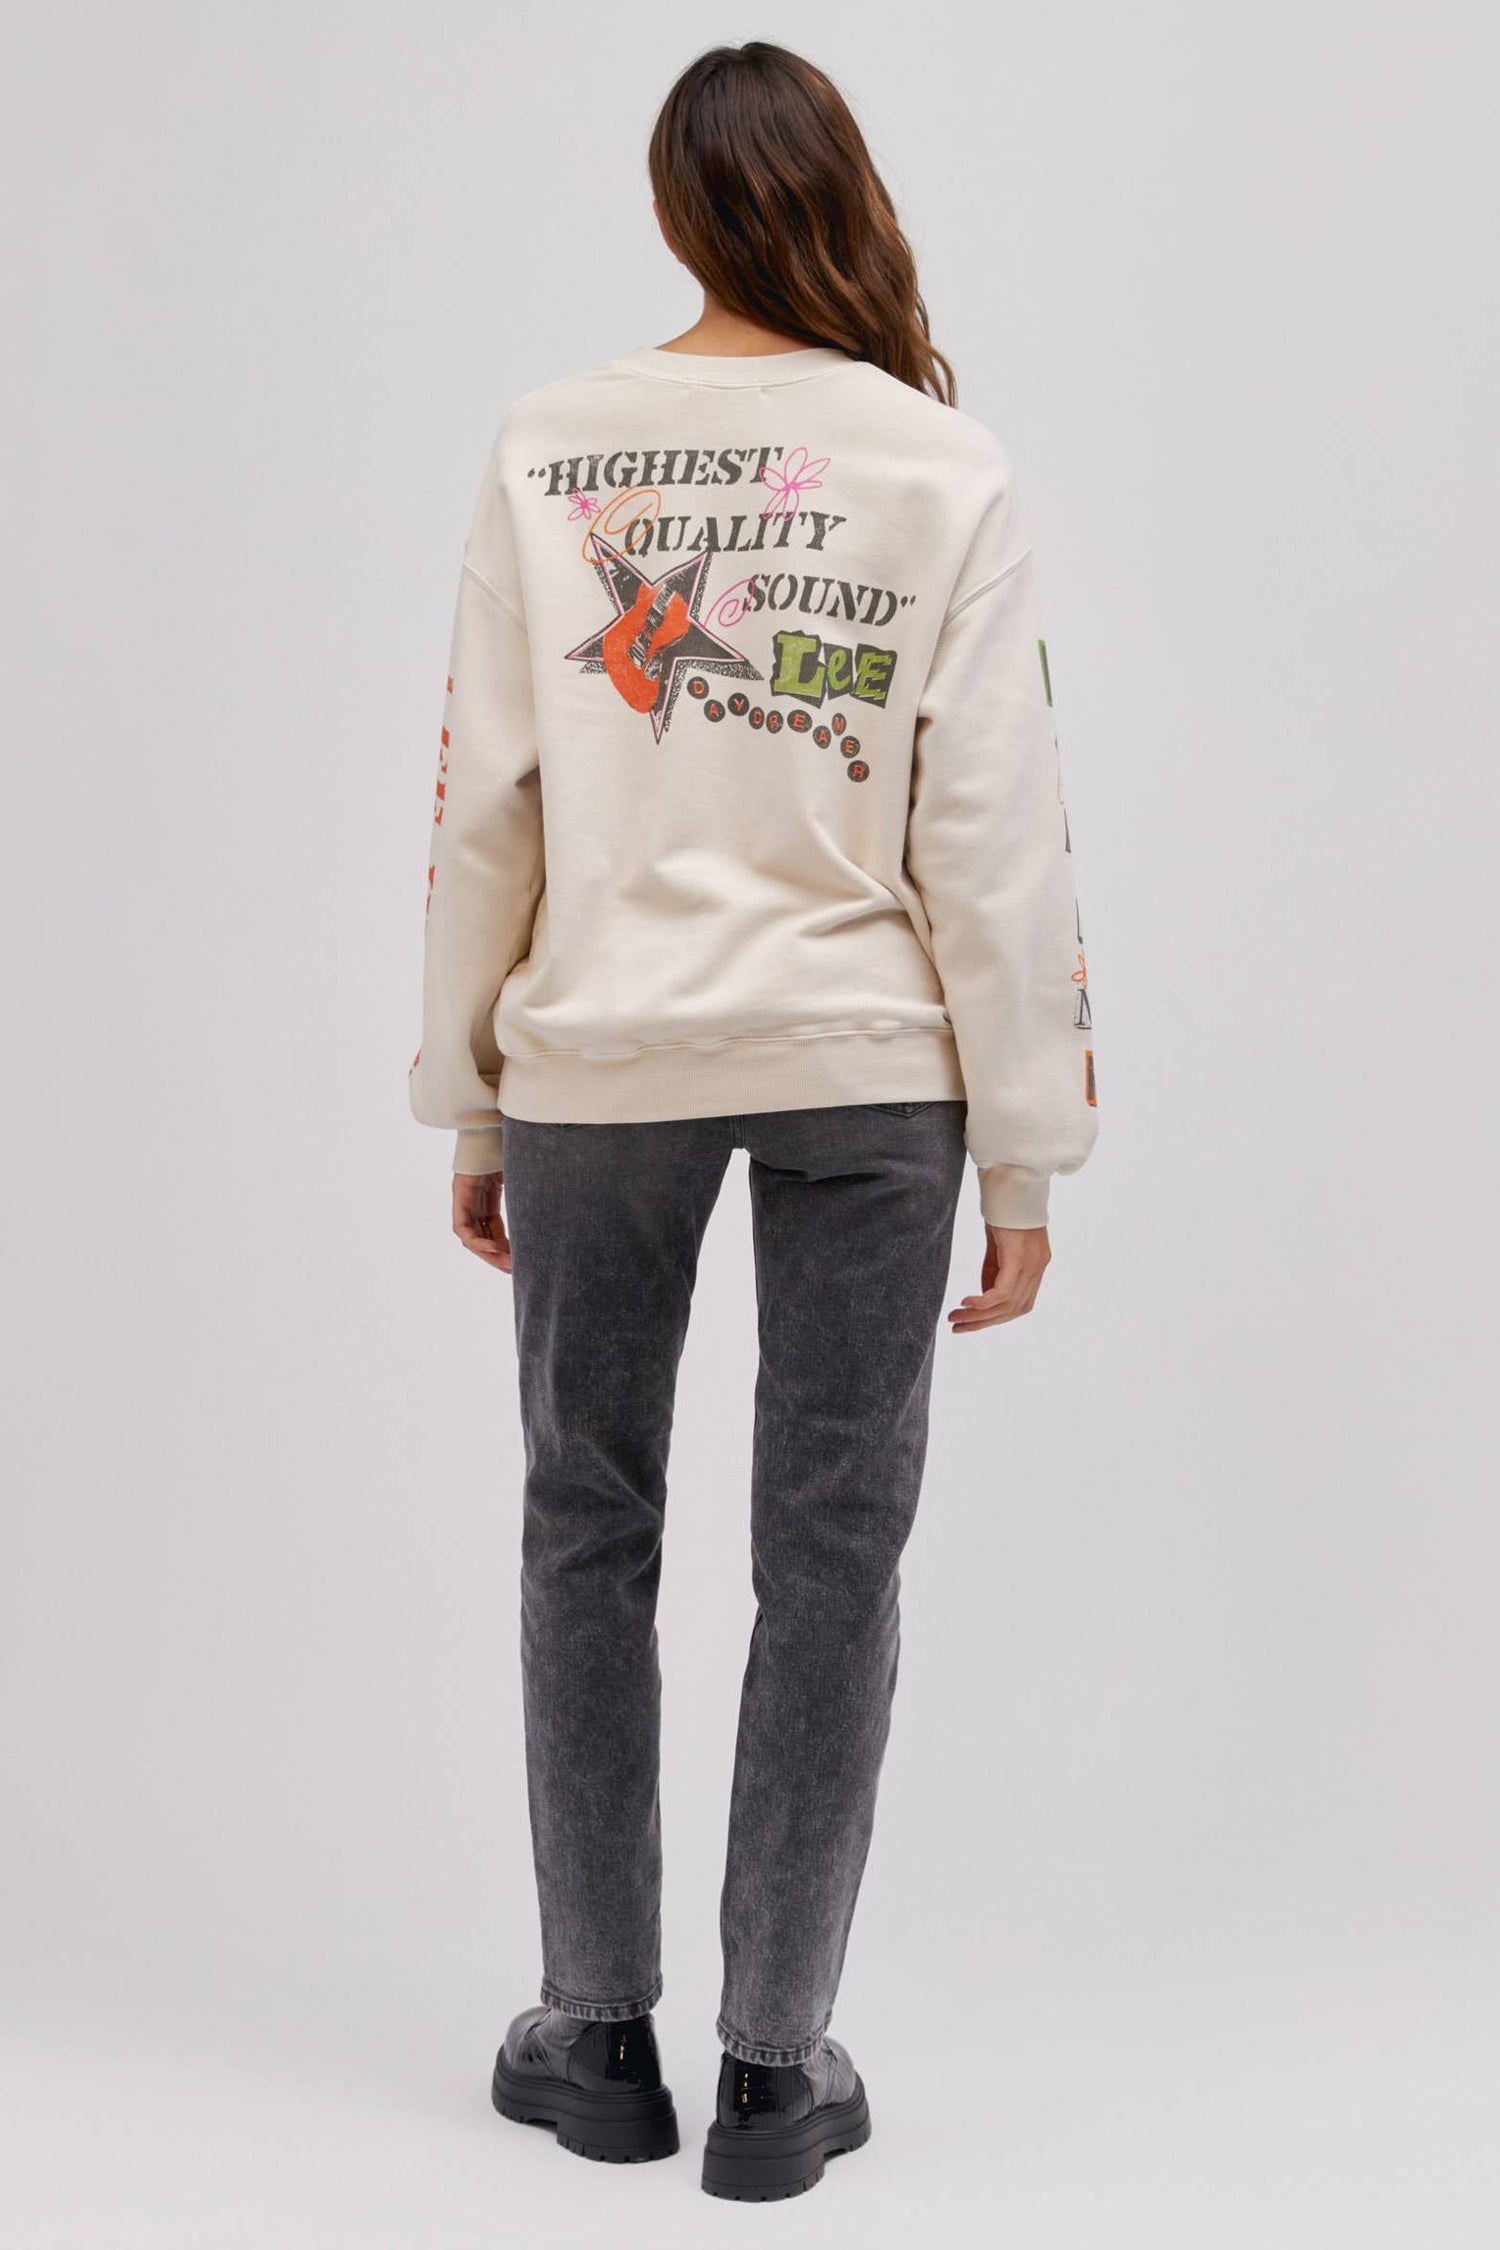 backside of model in standing pose wearing graphic sweatshirt and washed denim jeans